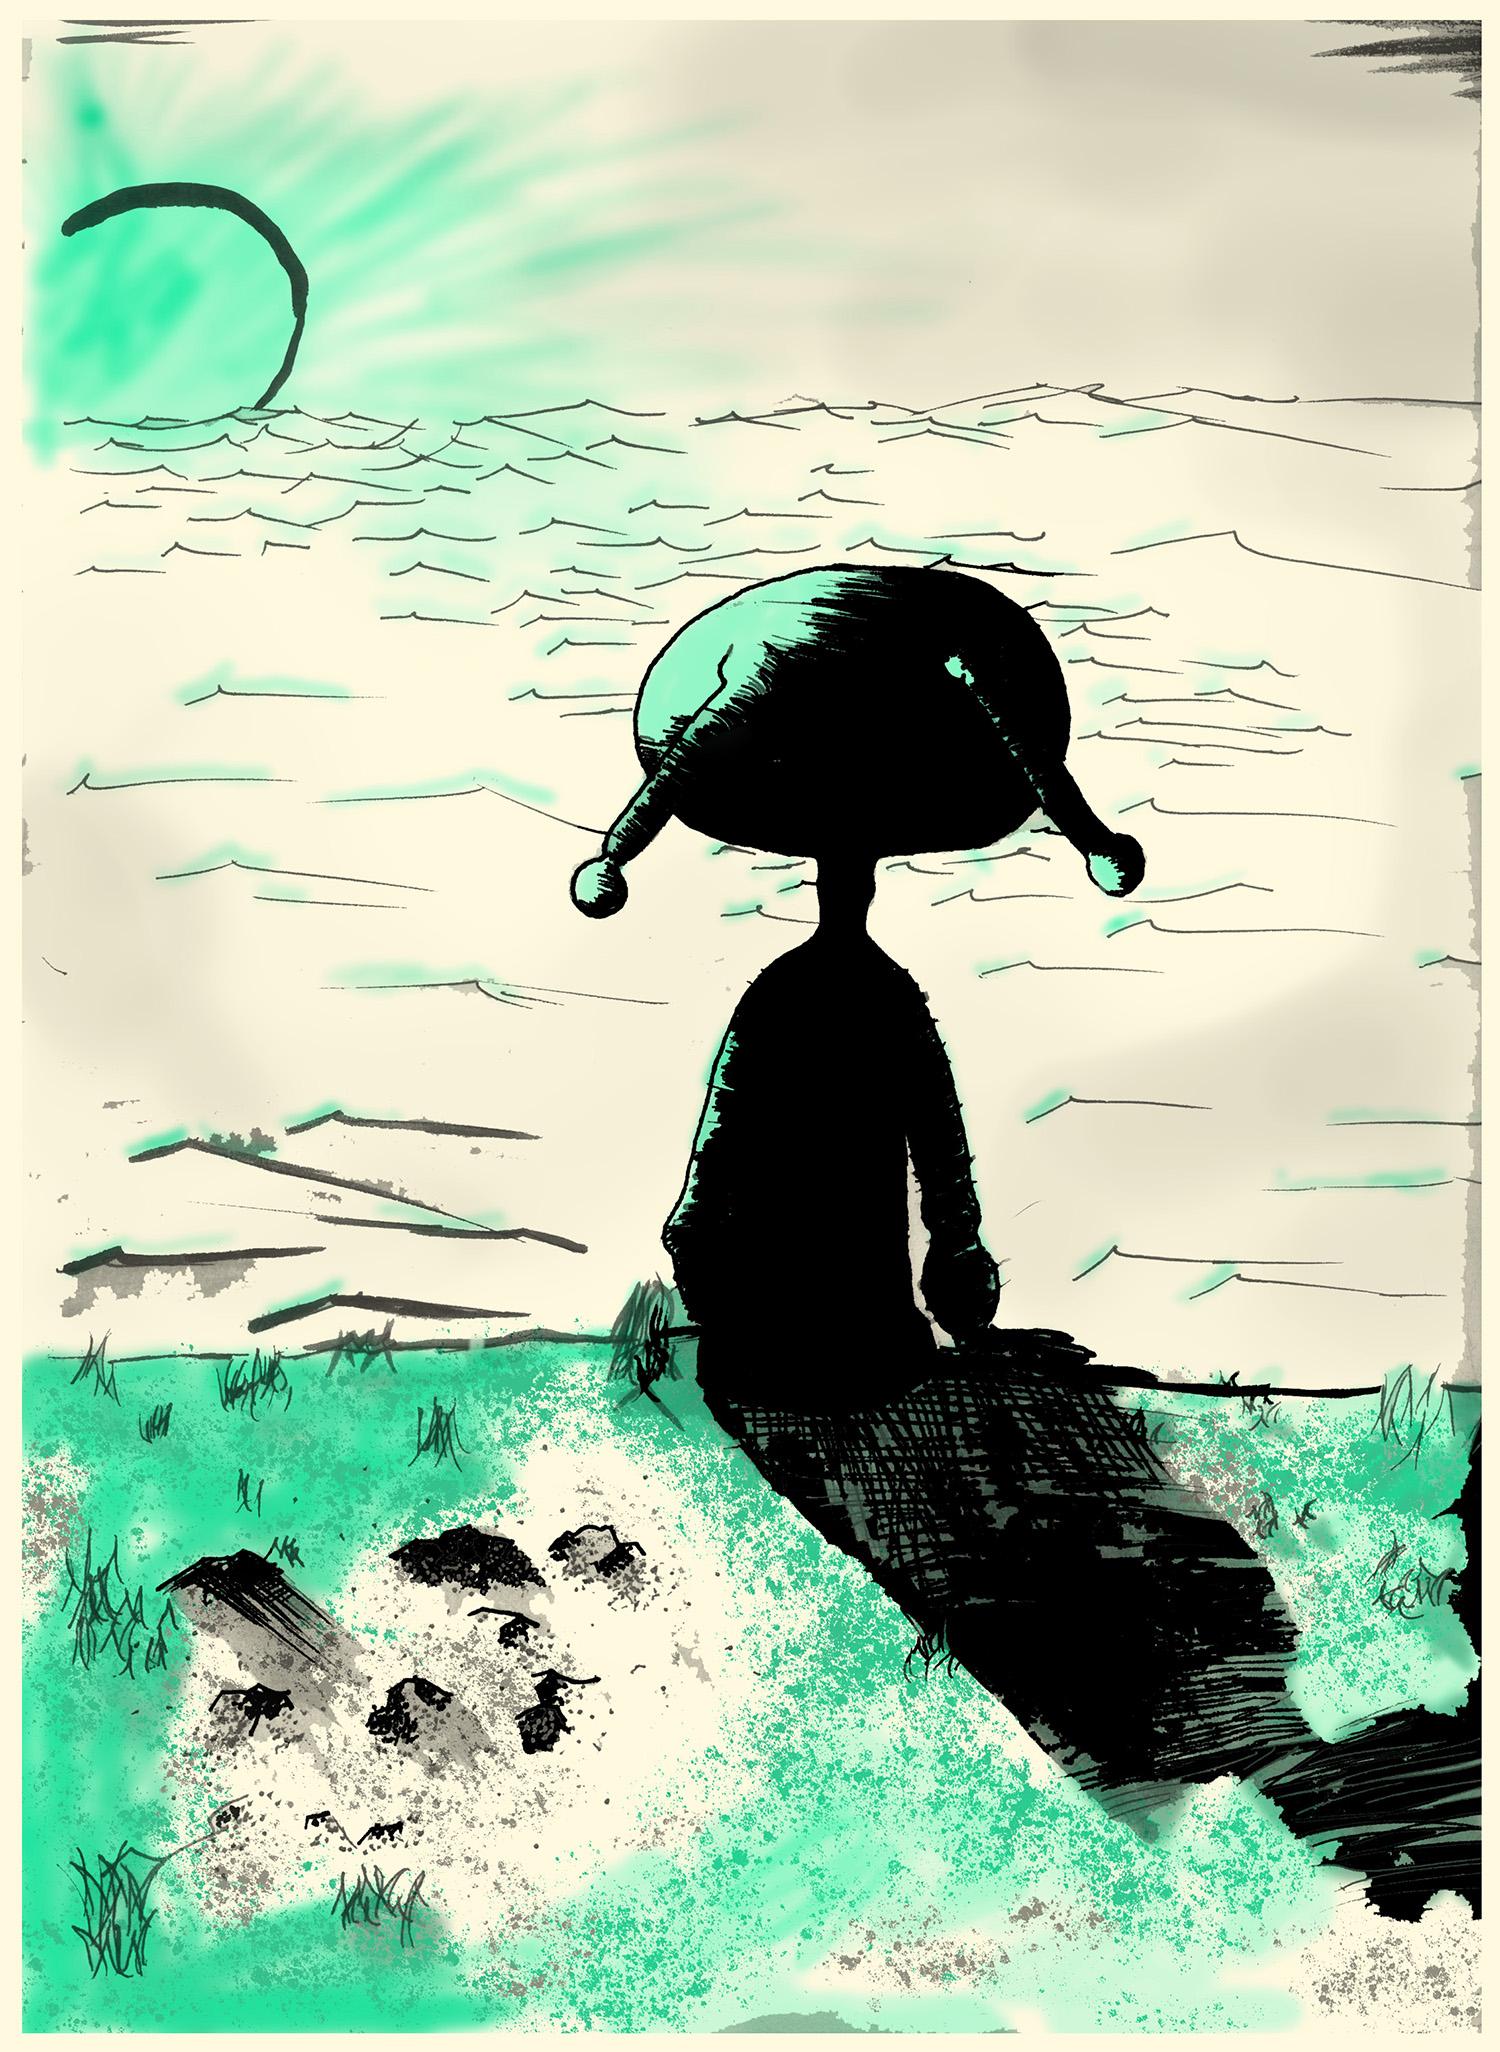 Illustration student work printed in green and black on cream paper. Image is of an alien sitting on a rough surface looking out over clouds.